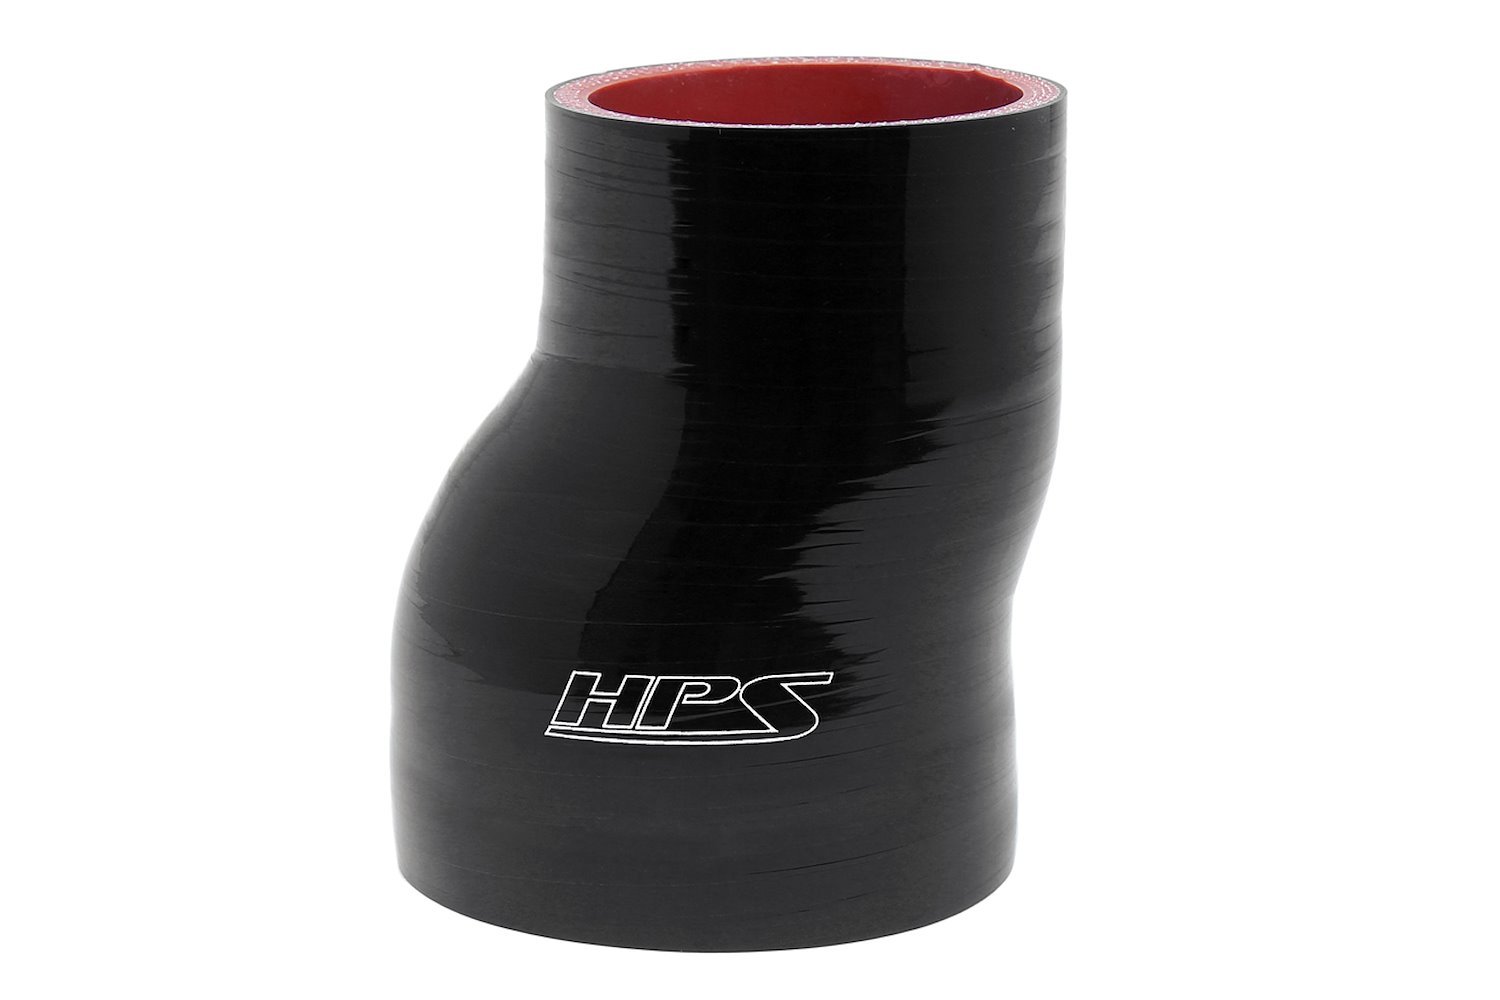 HTSOR-200-250-L6-BLK Silicone Offset Reducer Hose, High-Temp Reinforced, 2 in. - 2-1/2 in. ID, 6 in. Long, Black